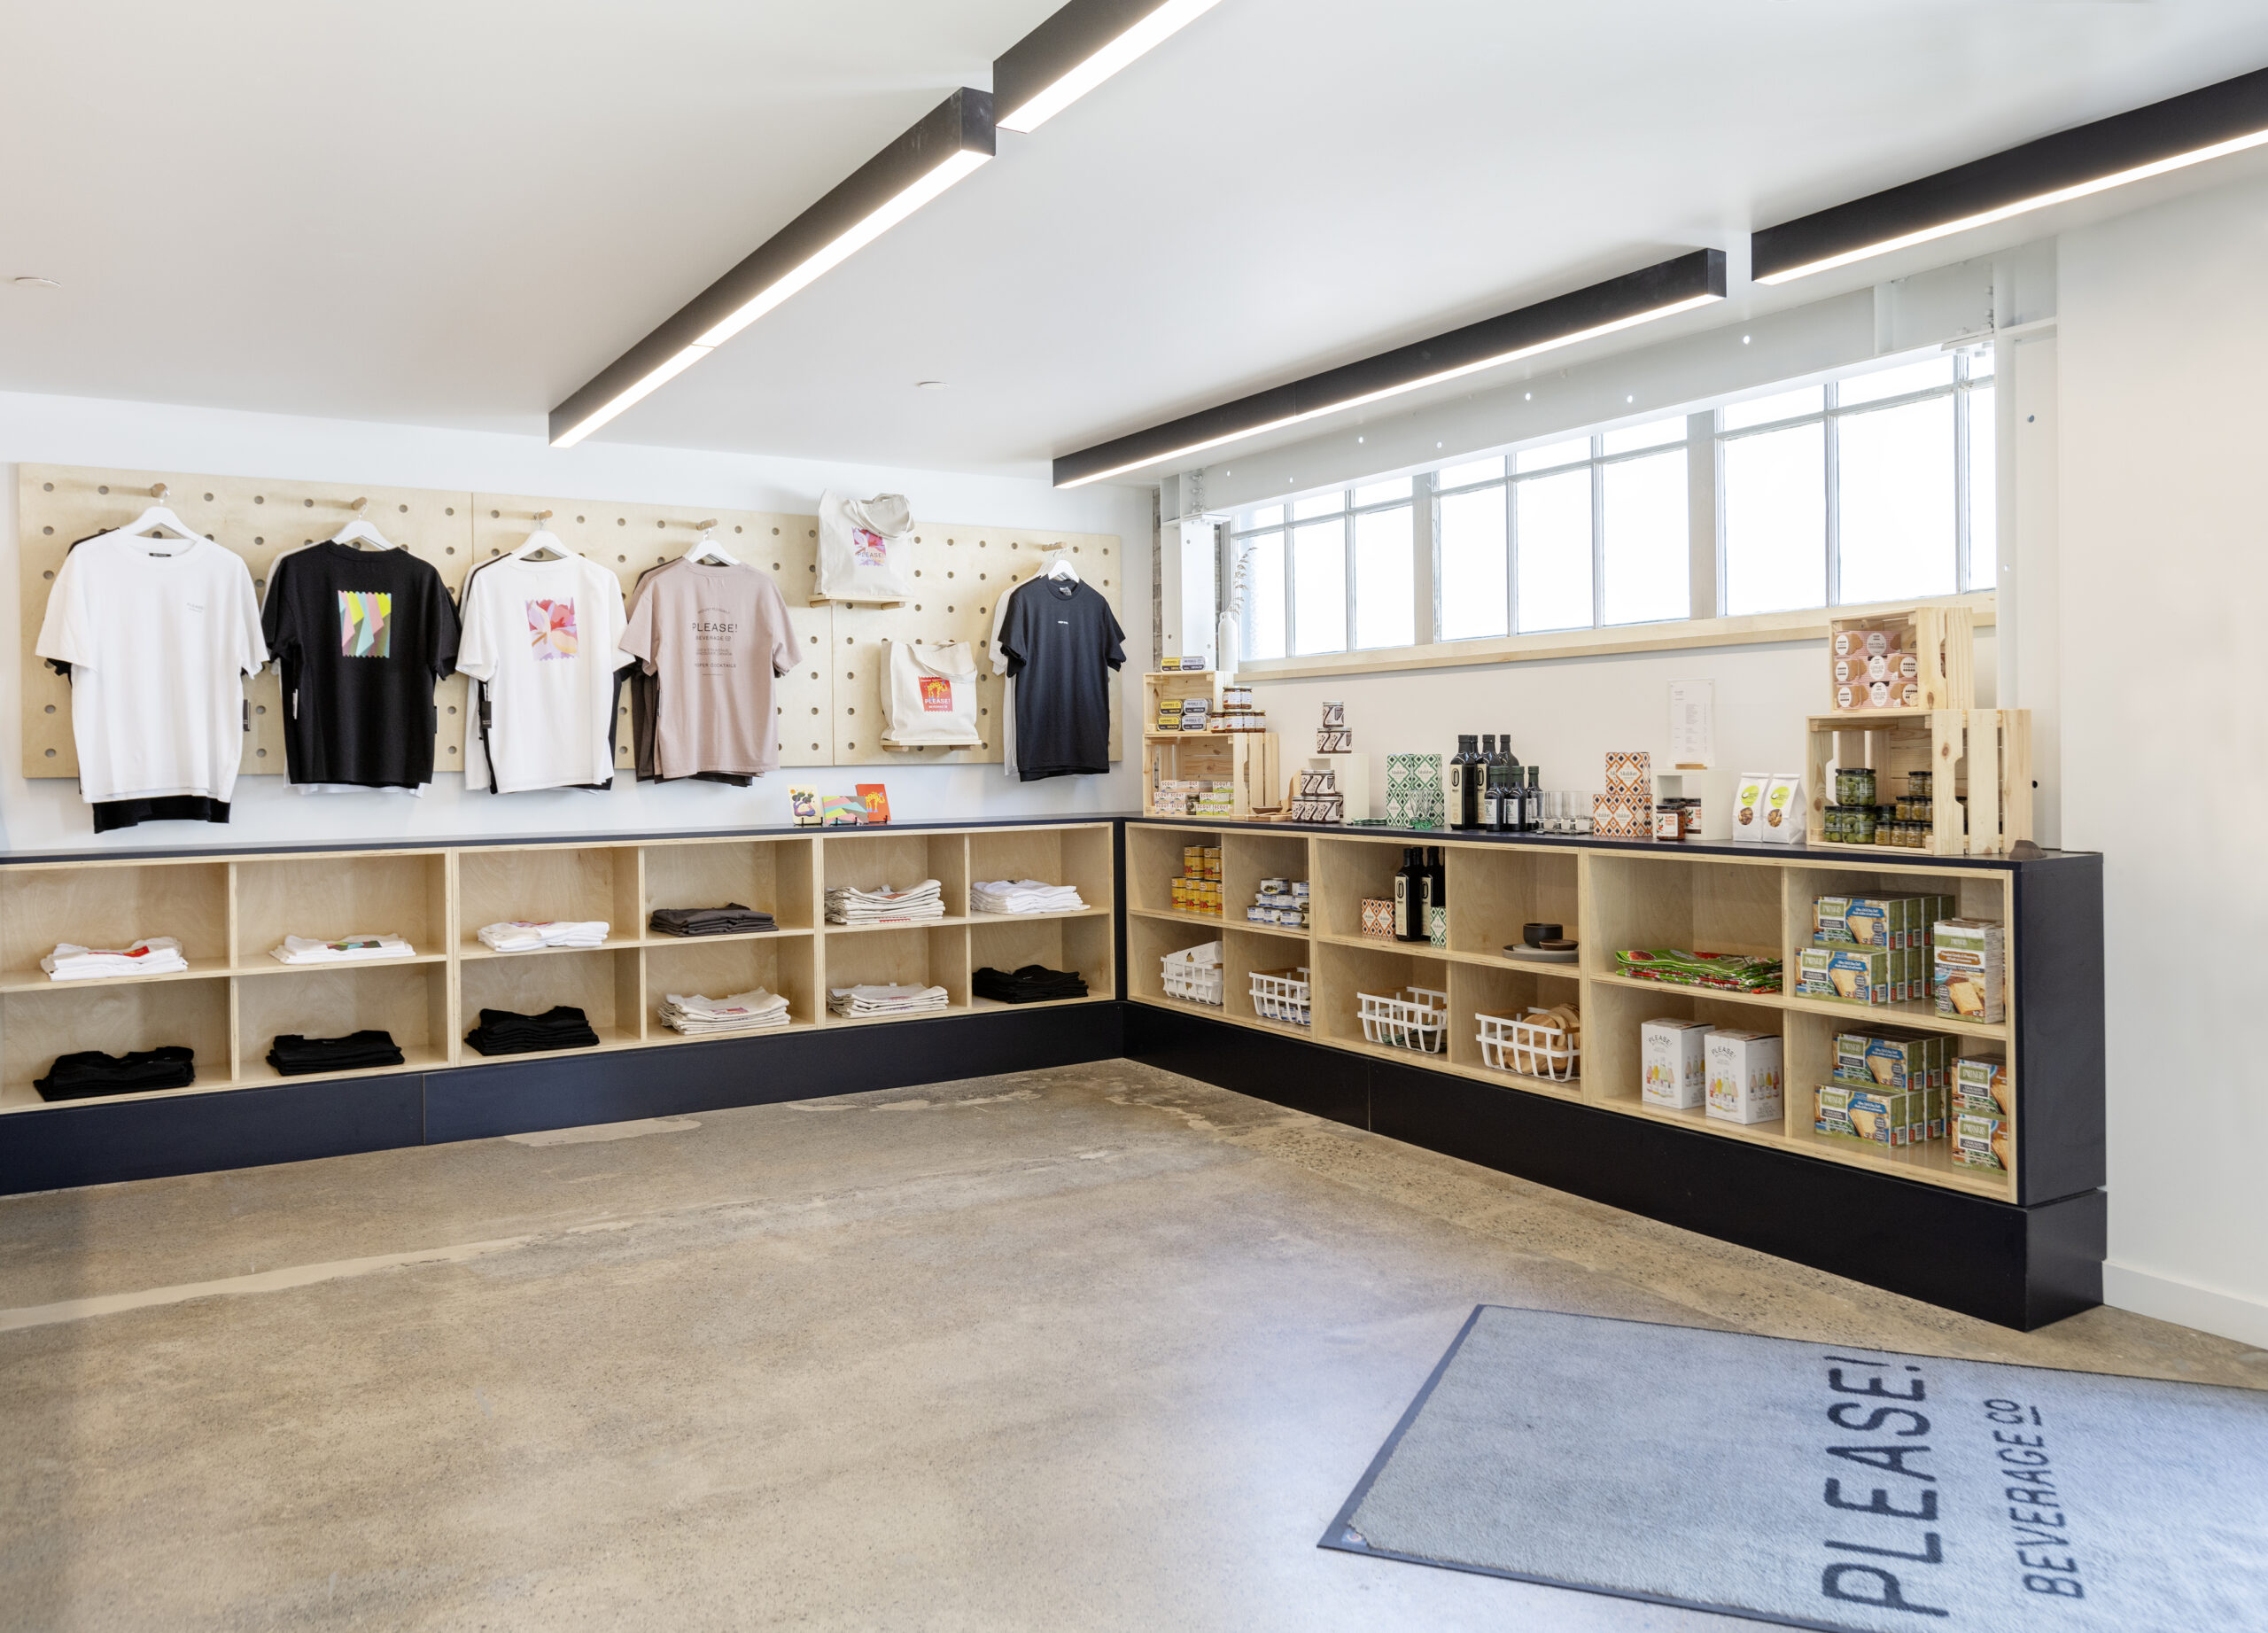 Bright and modern retail space within a beverage company featuring an array of merchandise including t-shirts displayed on a pegboard wall, and shelves neatly stocked with gourmet food items, beverages, and assorted goods, under warm ambient lighting with large windows providing natural light.